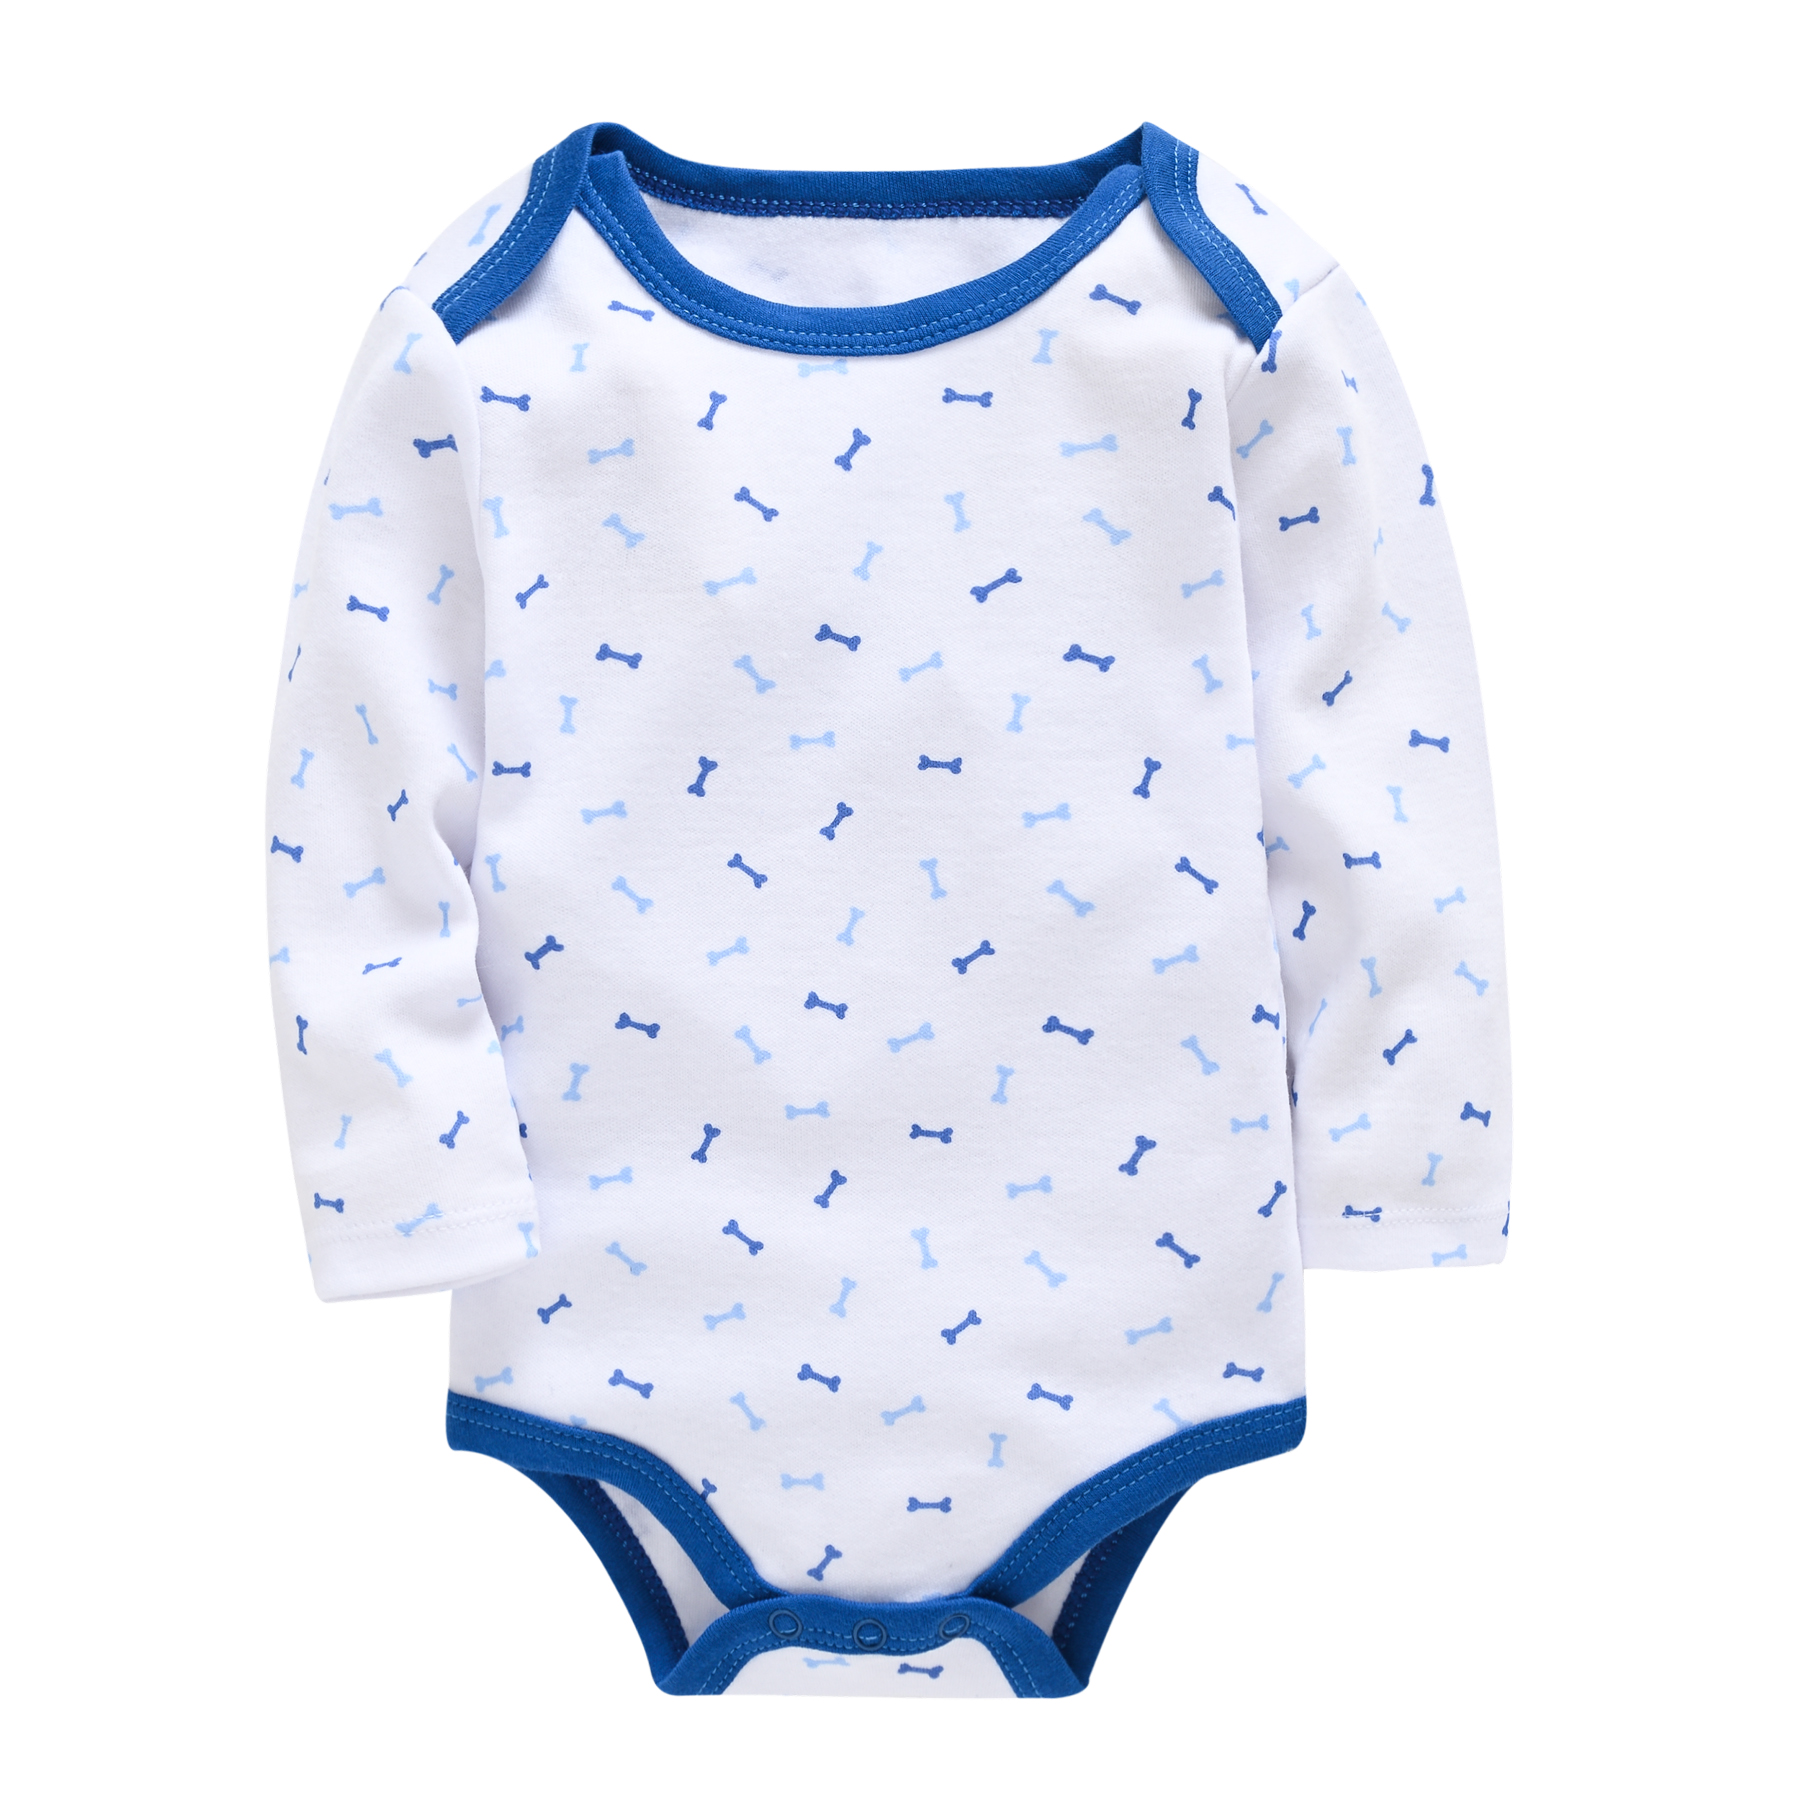 Baby Body Longsleeve Dogbones design at titchytastic